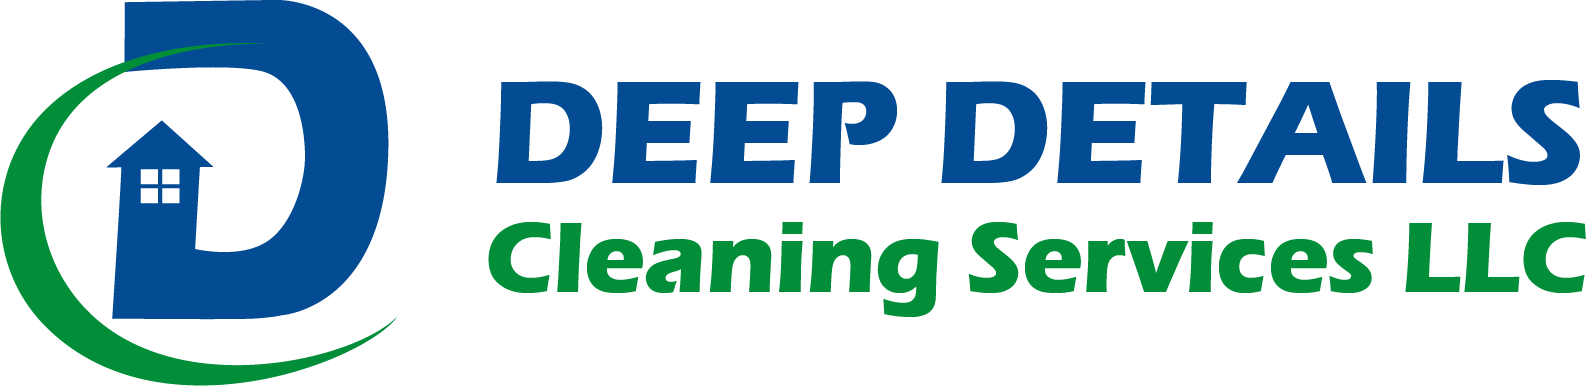 deep-details-cleaning-services-horizontal_4x